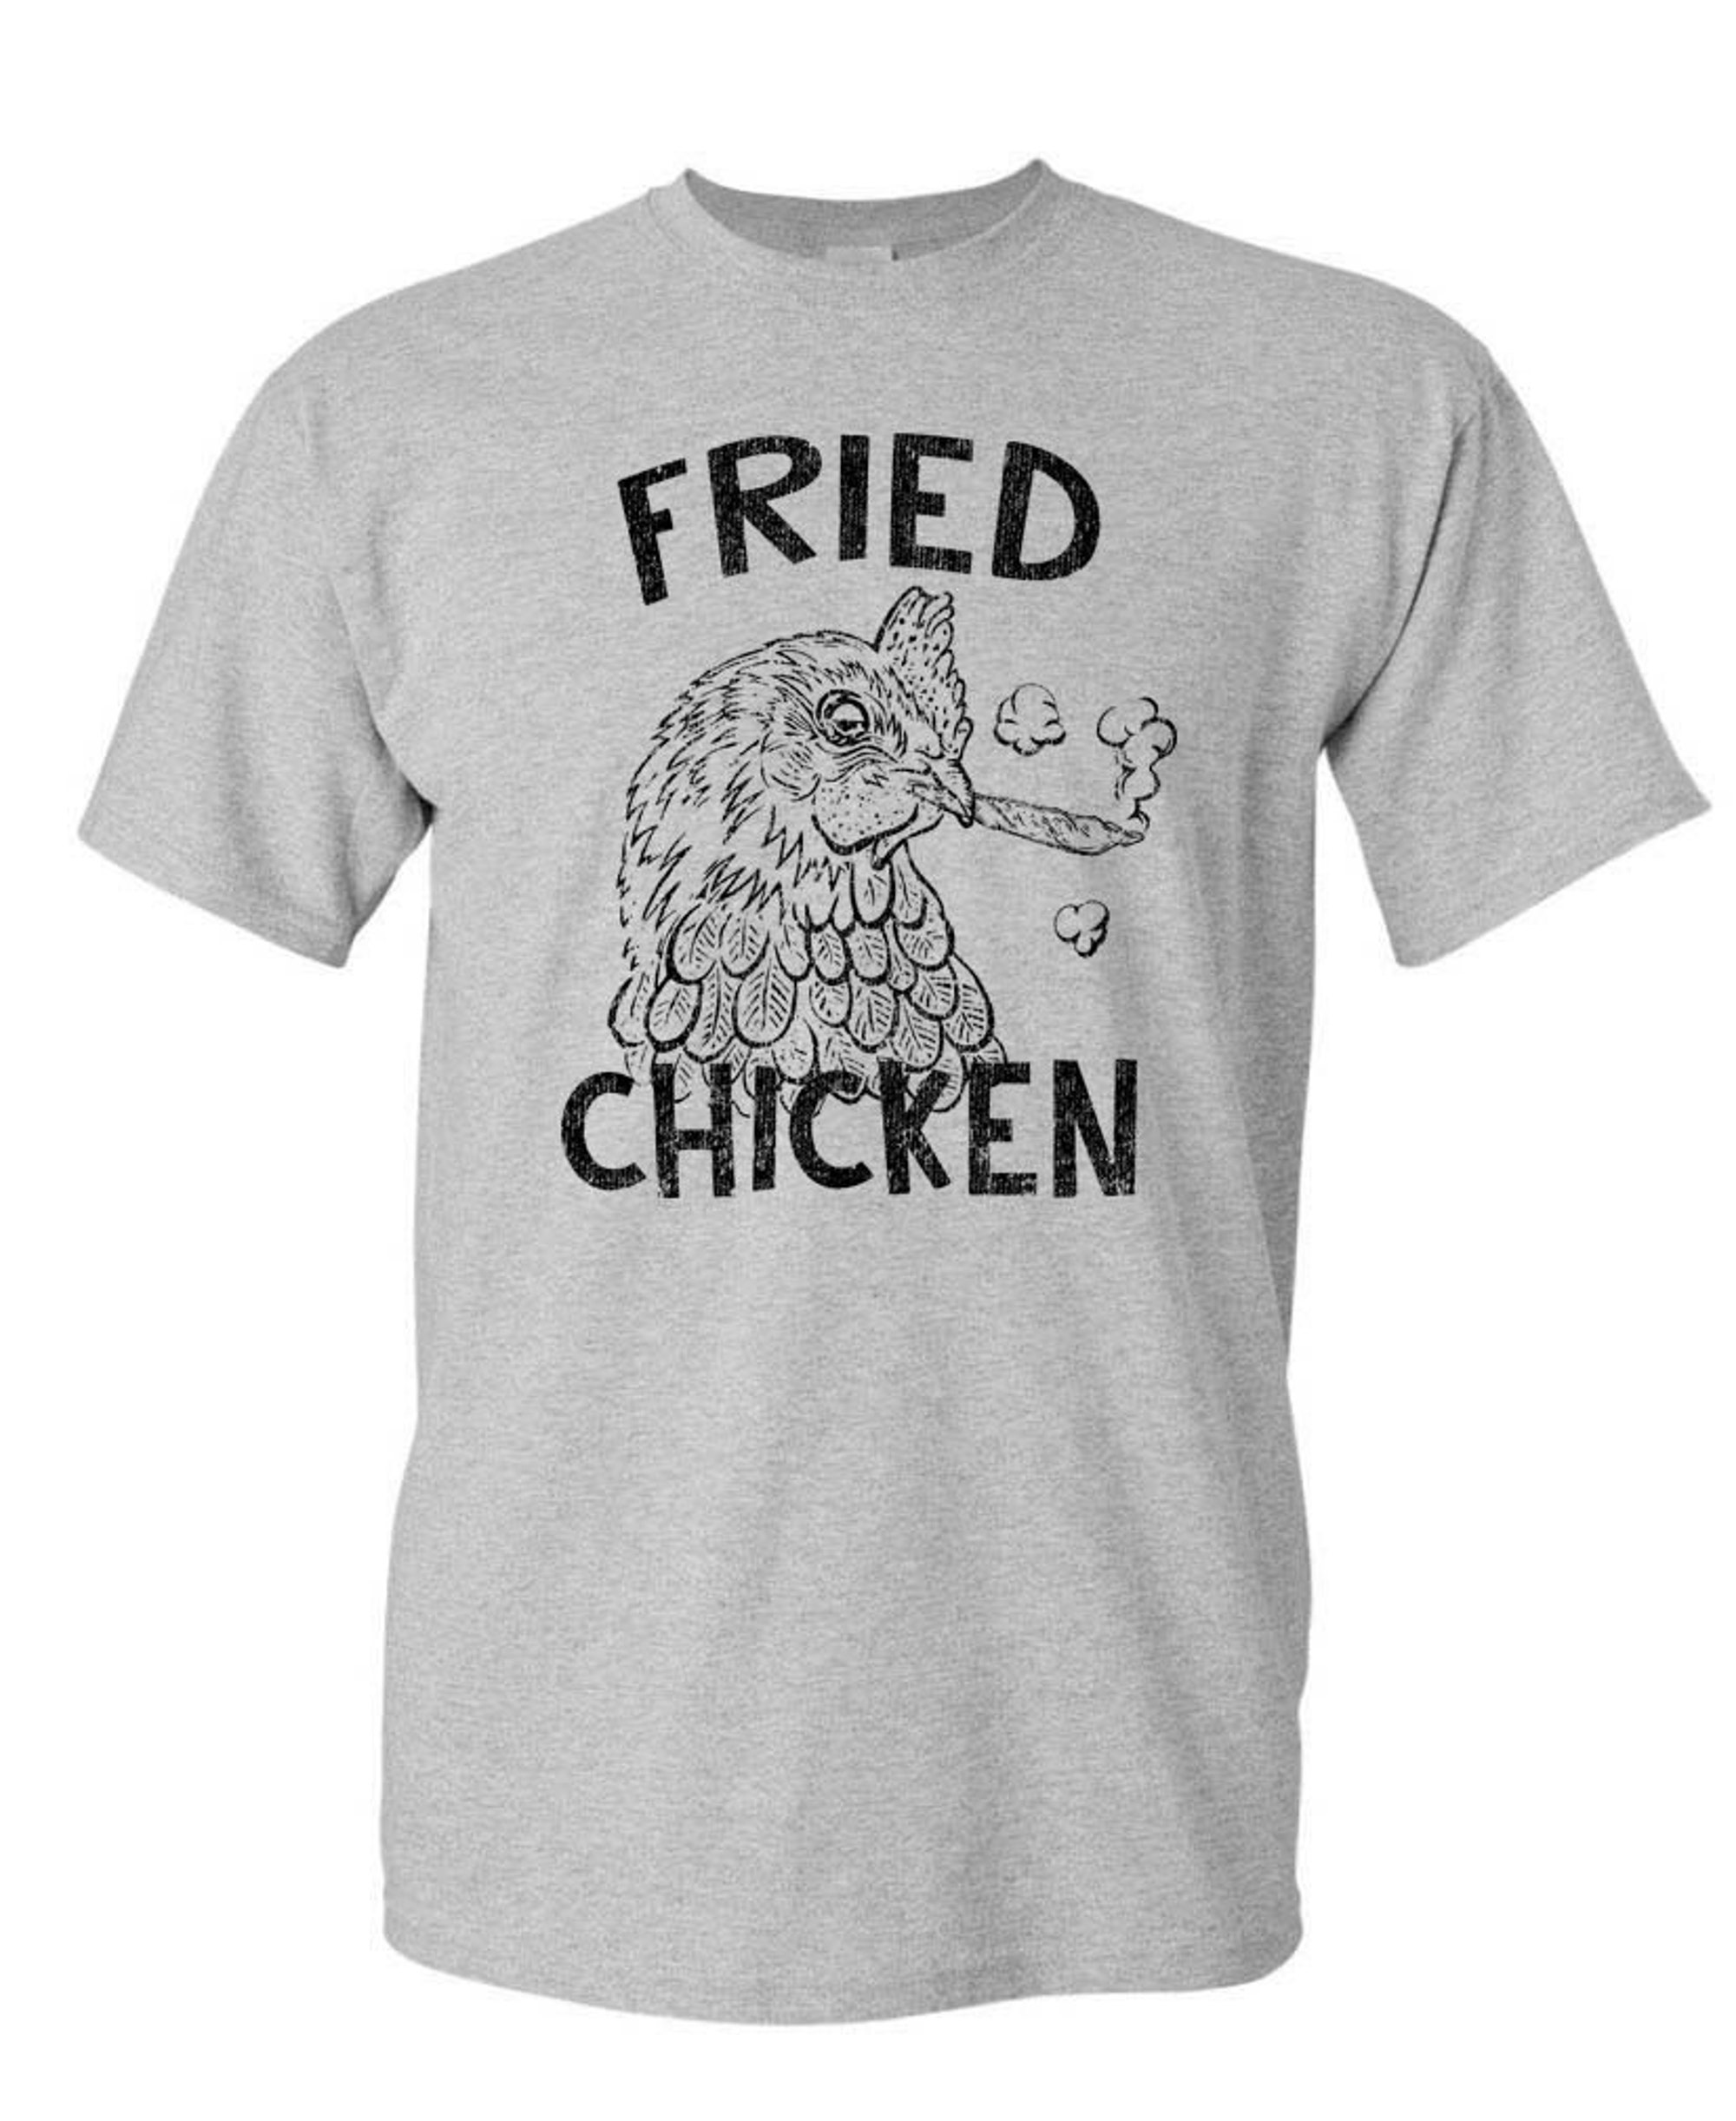 Discover FRIED CHICKEN T-Shirt